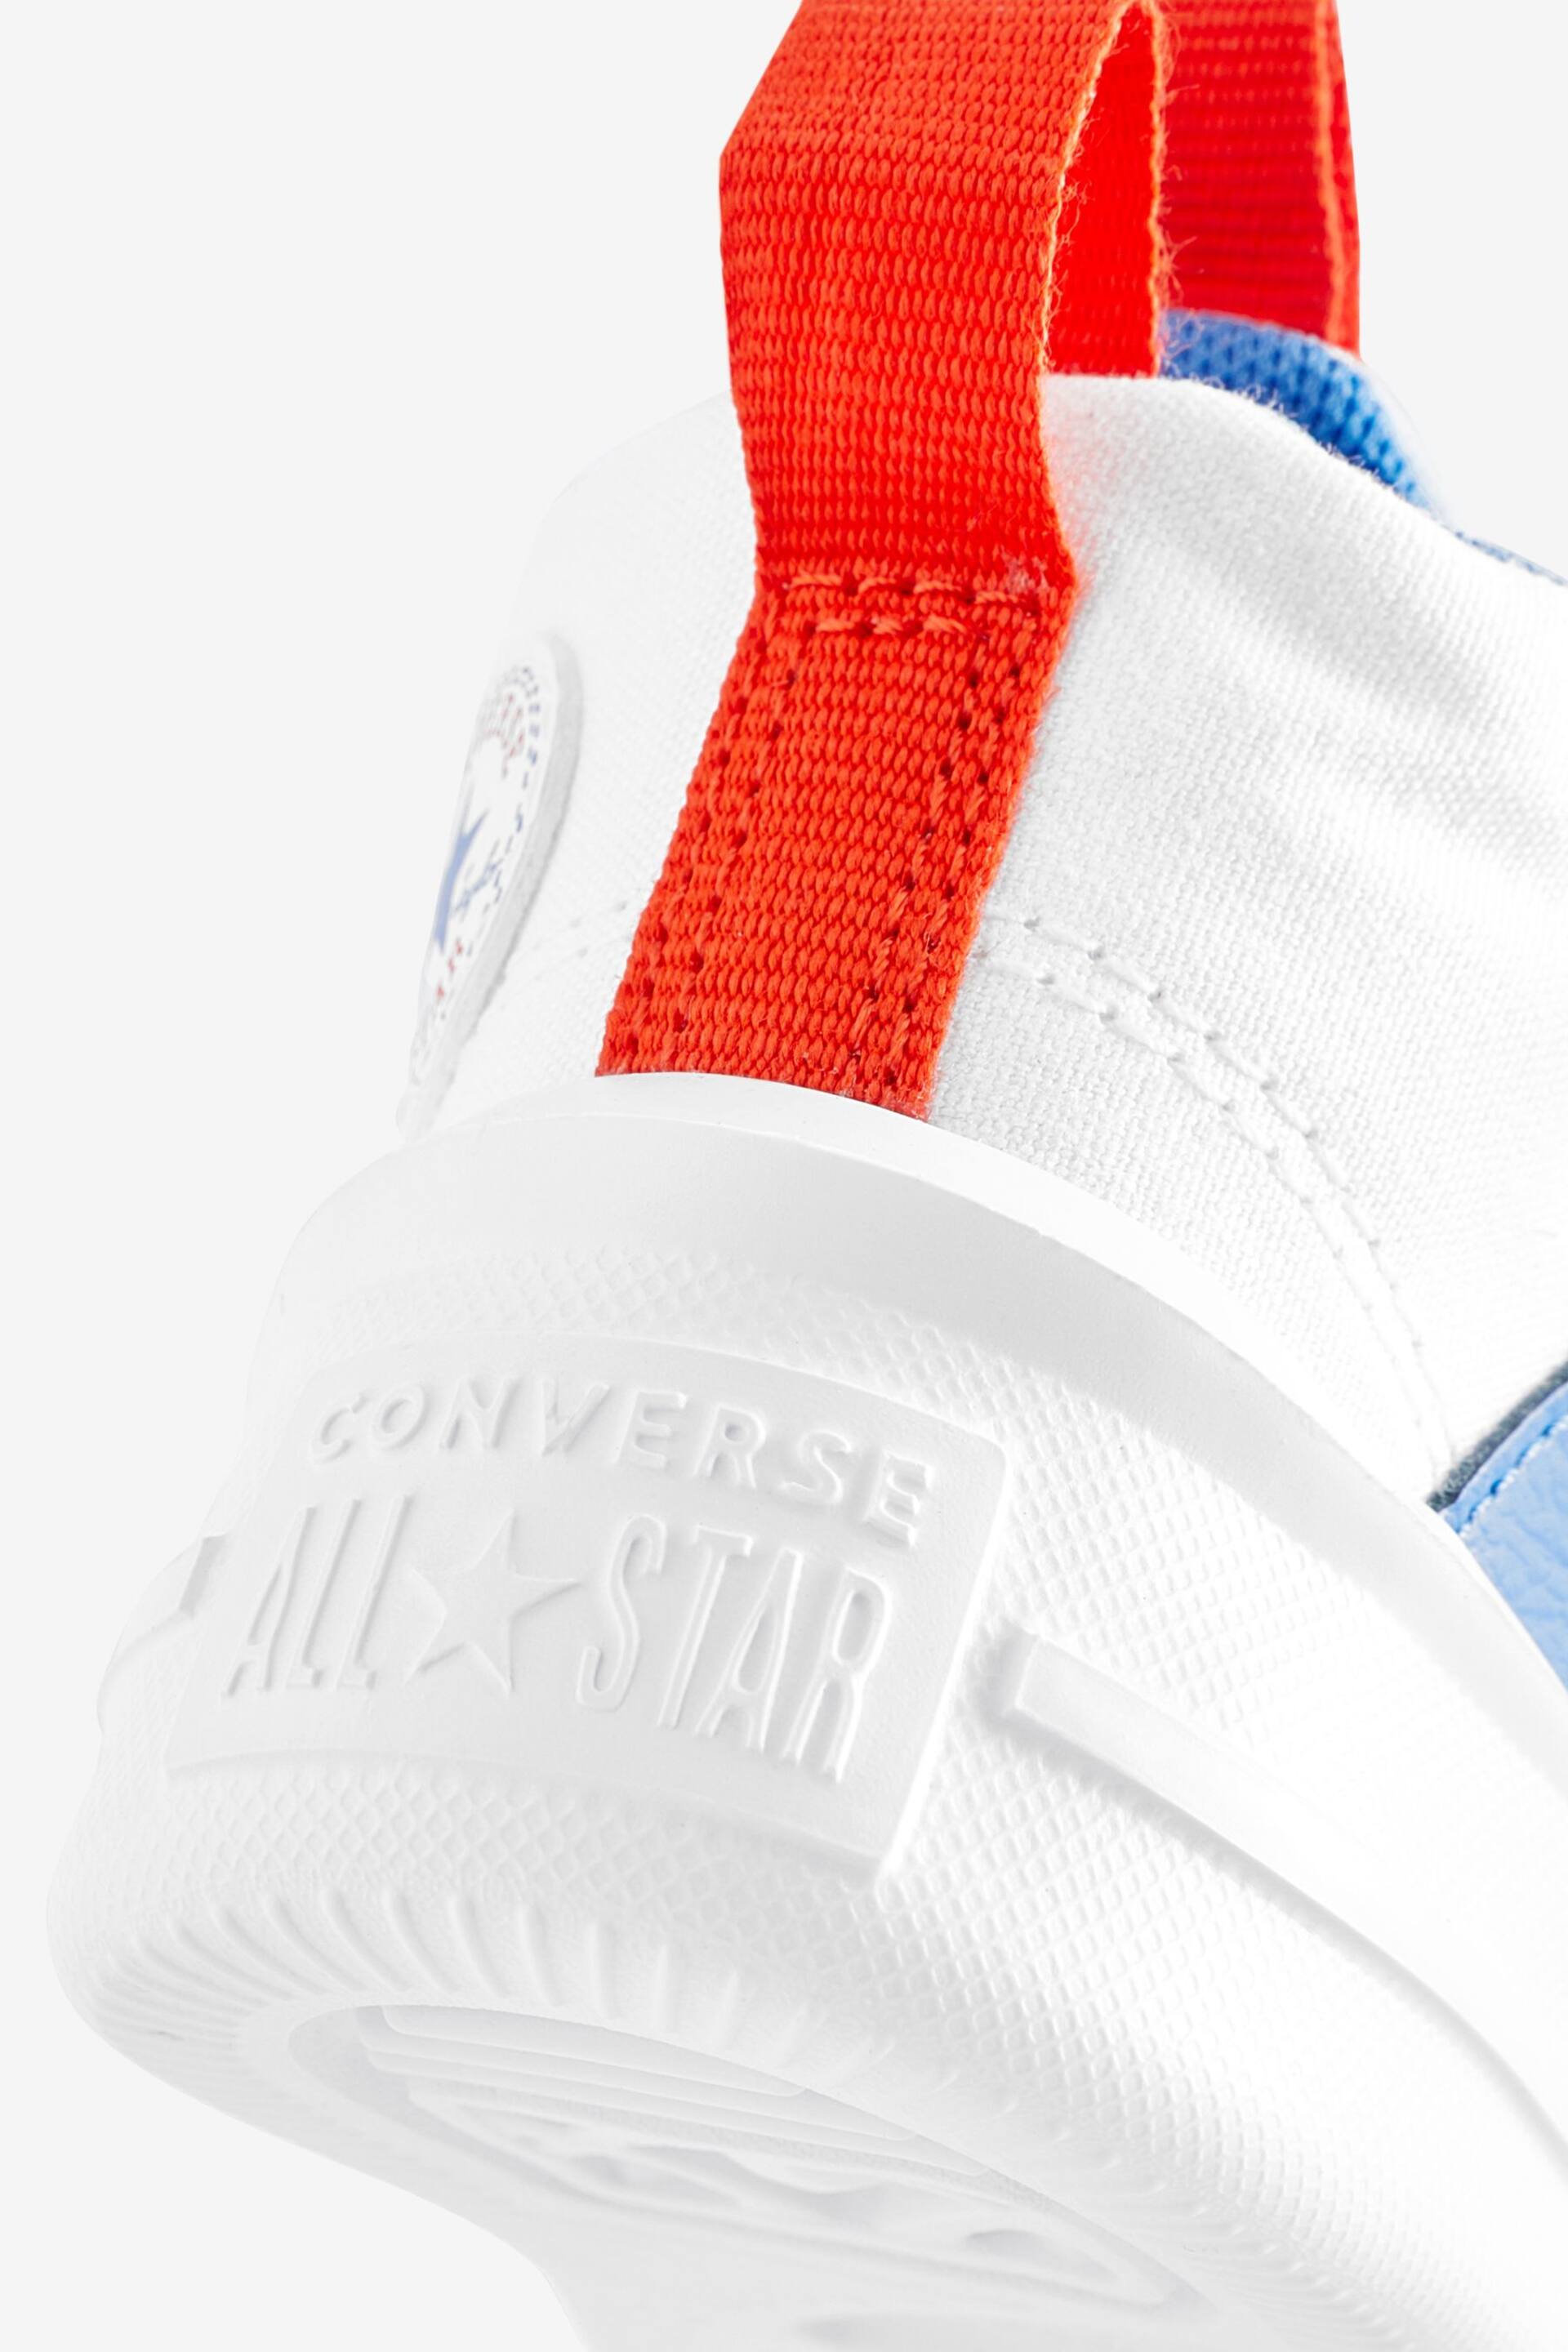 Converse White Ultra Trainers - Image 8 of 9